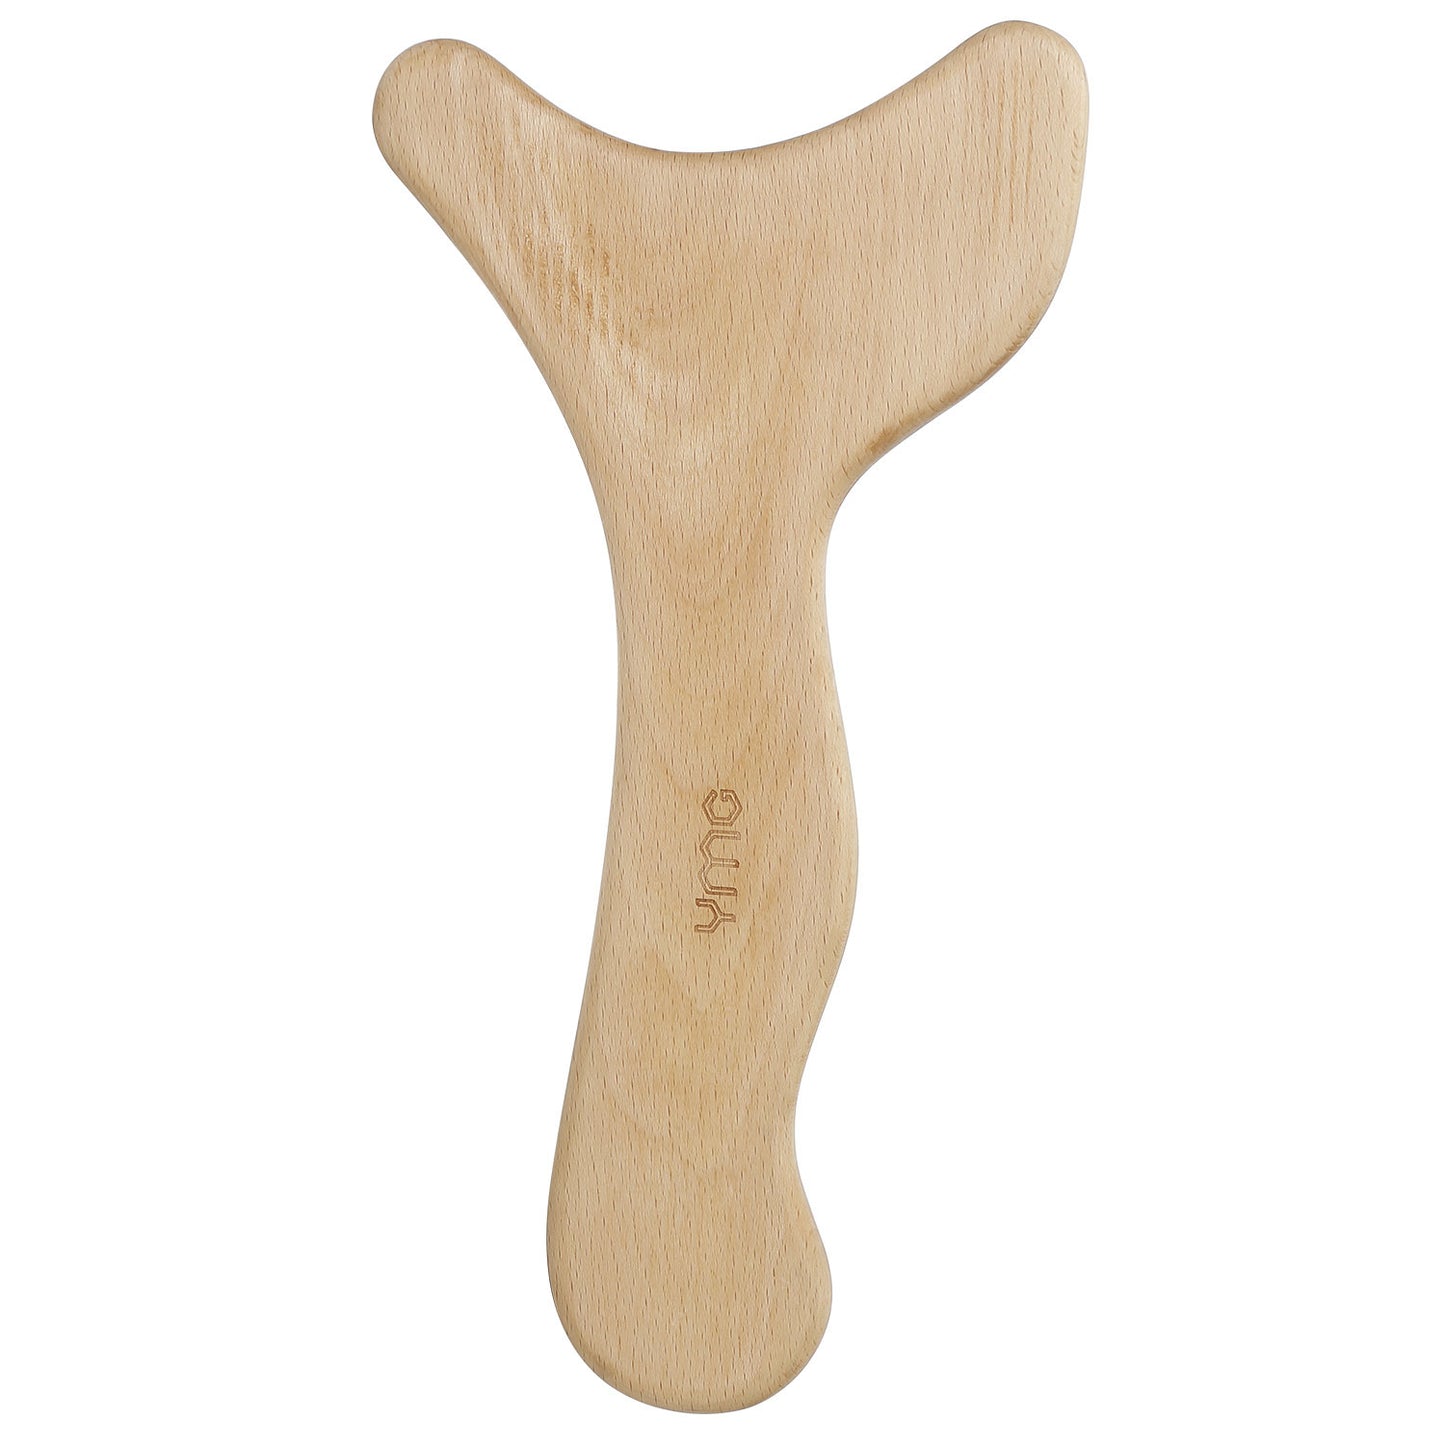 Wood Therapy Massage Tool Lymphatic Drainage Paddle Wooden Scraping Tools Therapy Massager- Hard Rock Health